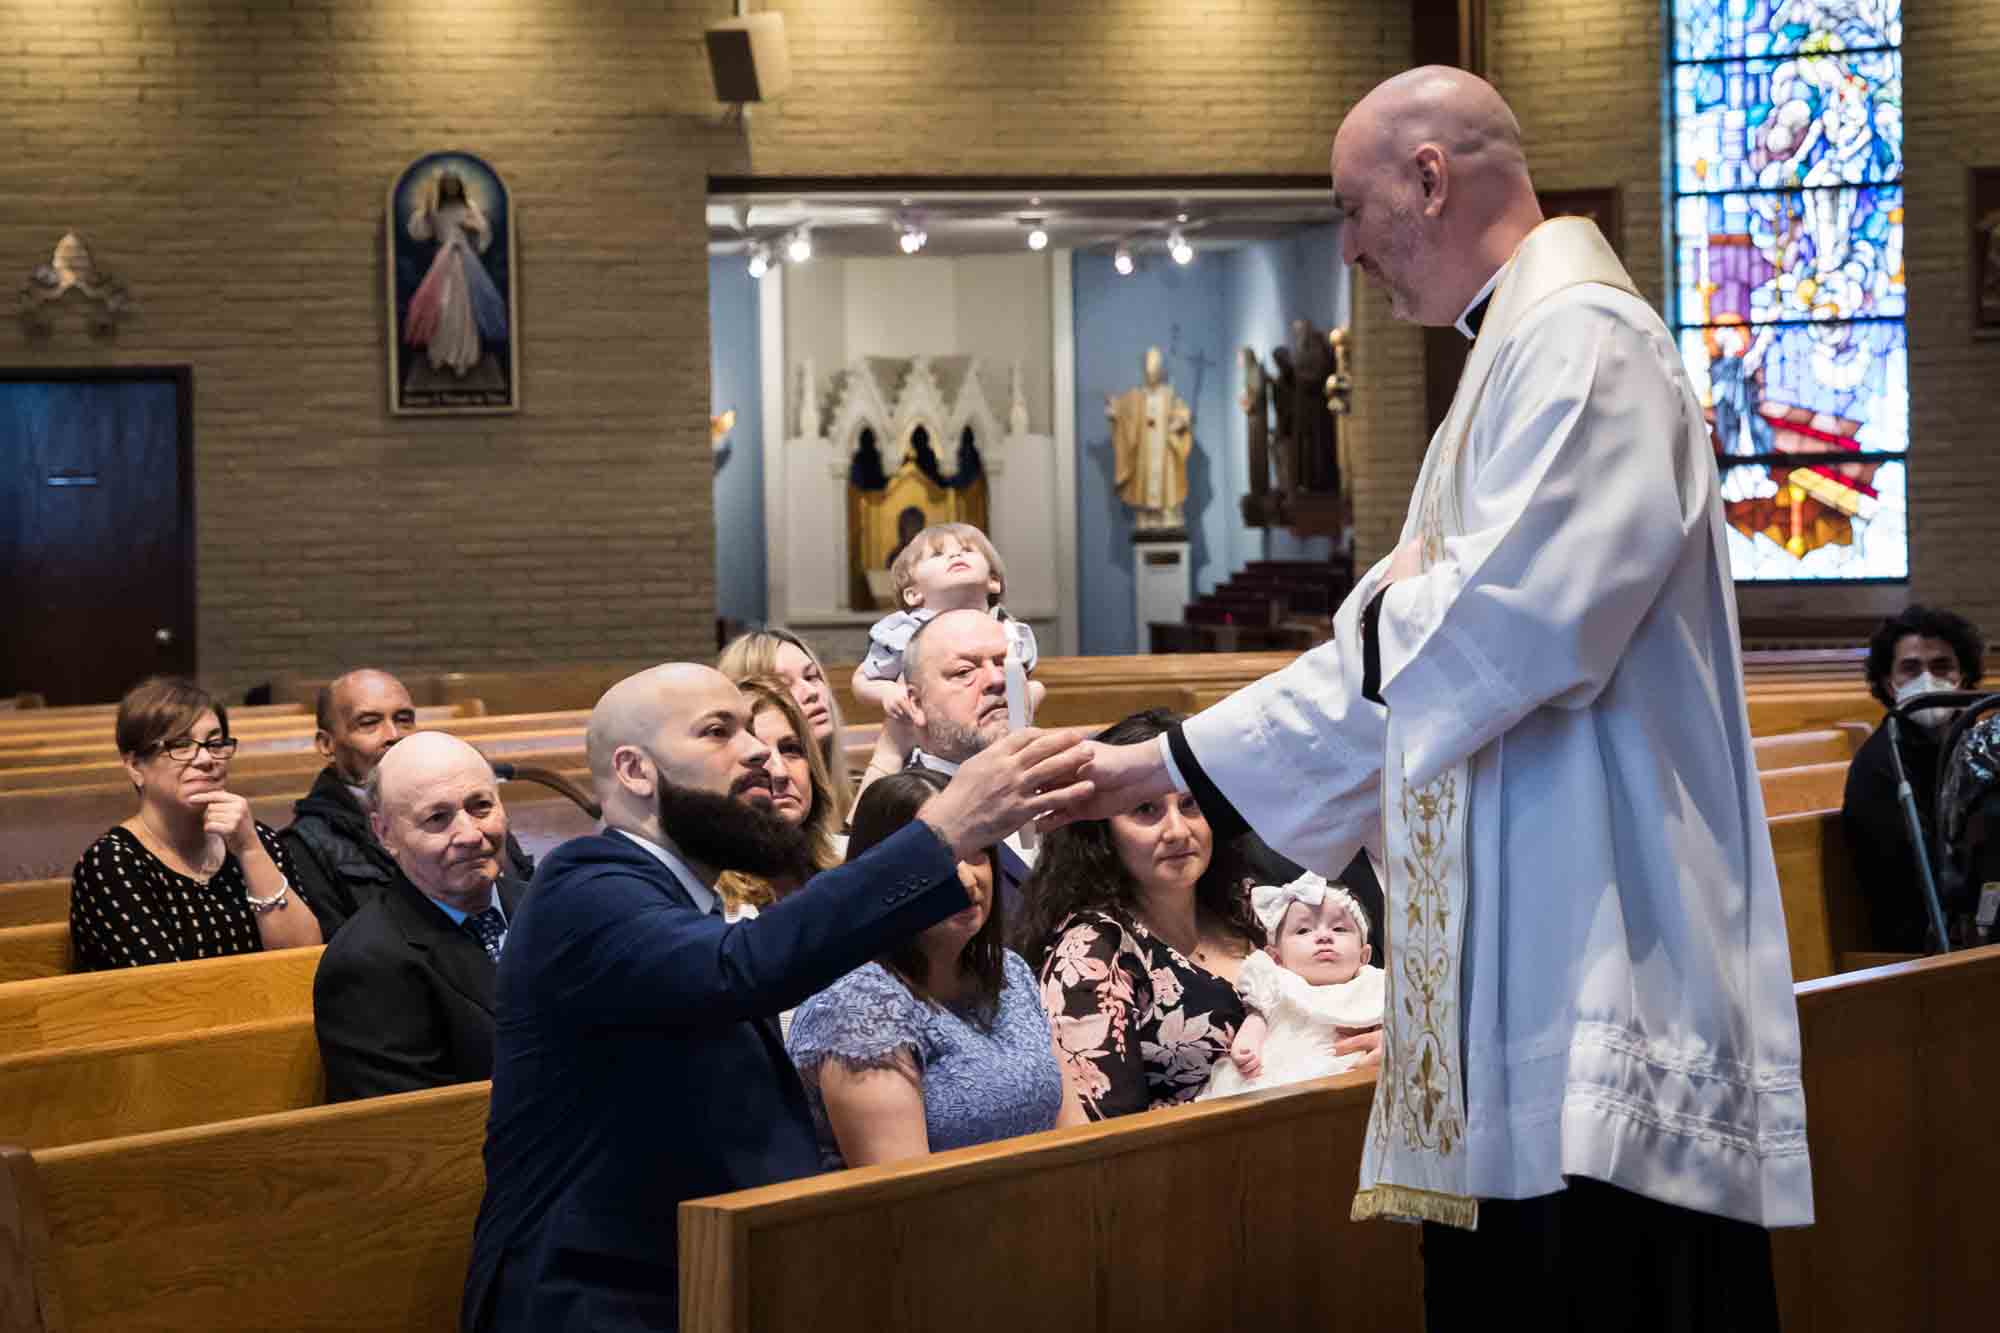 Maspeth baptism photos of priest giving lit candle to godfather in pew